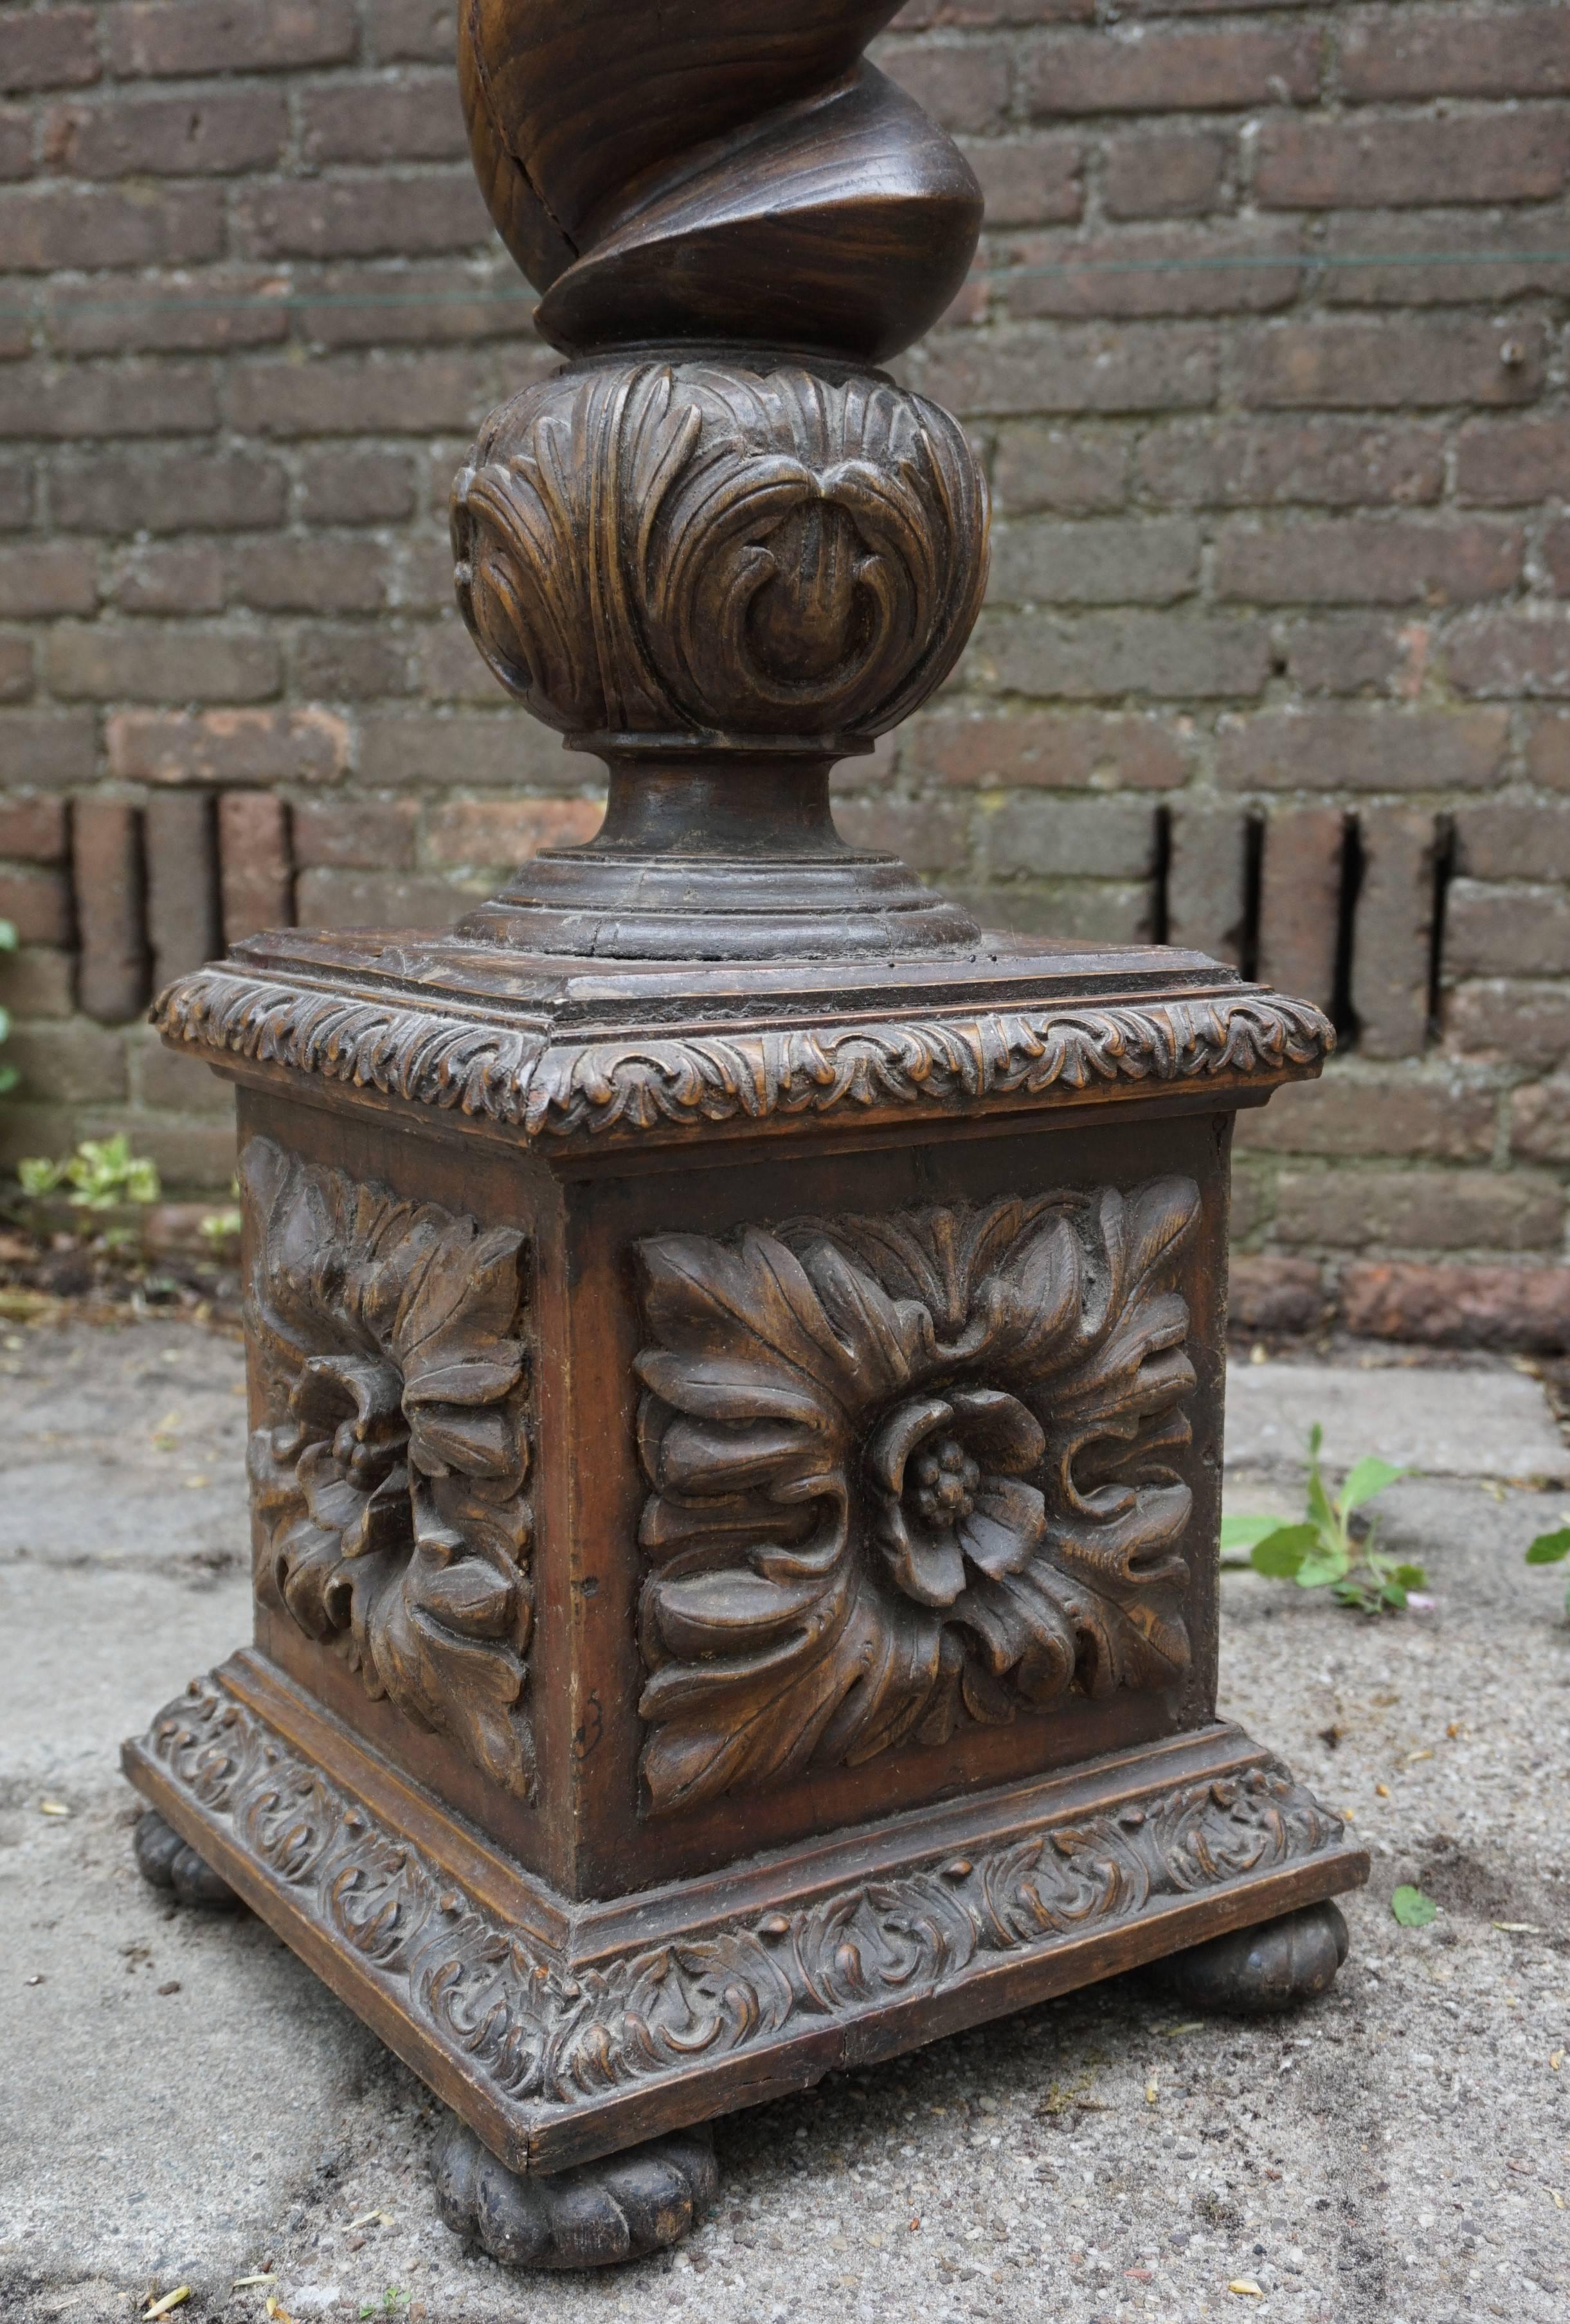 Antique Large & Hand-Carved Mid-19th Century Baroque Pedestal / Sculpture Stand 9